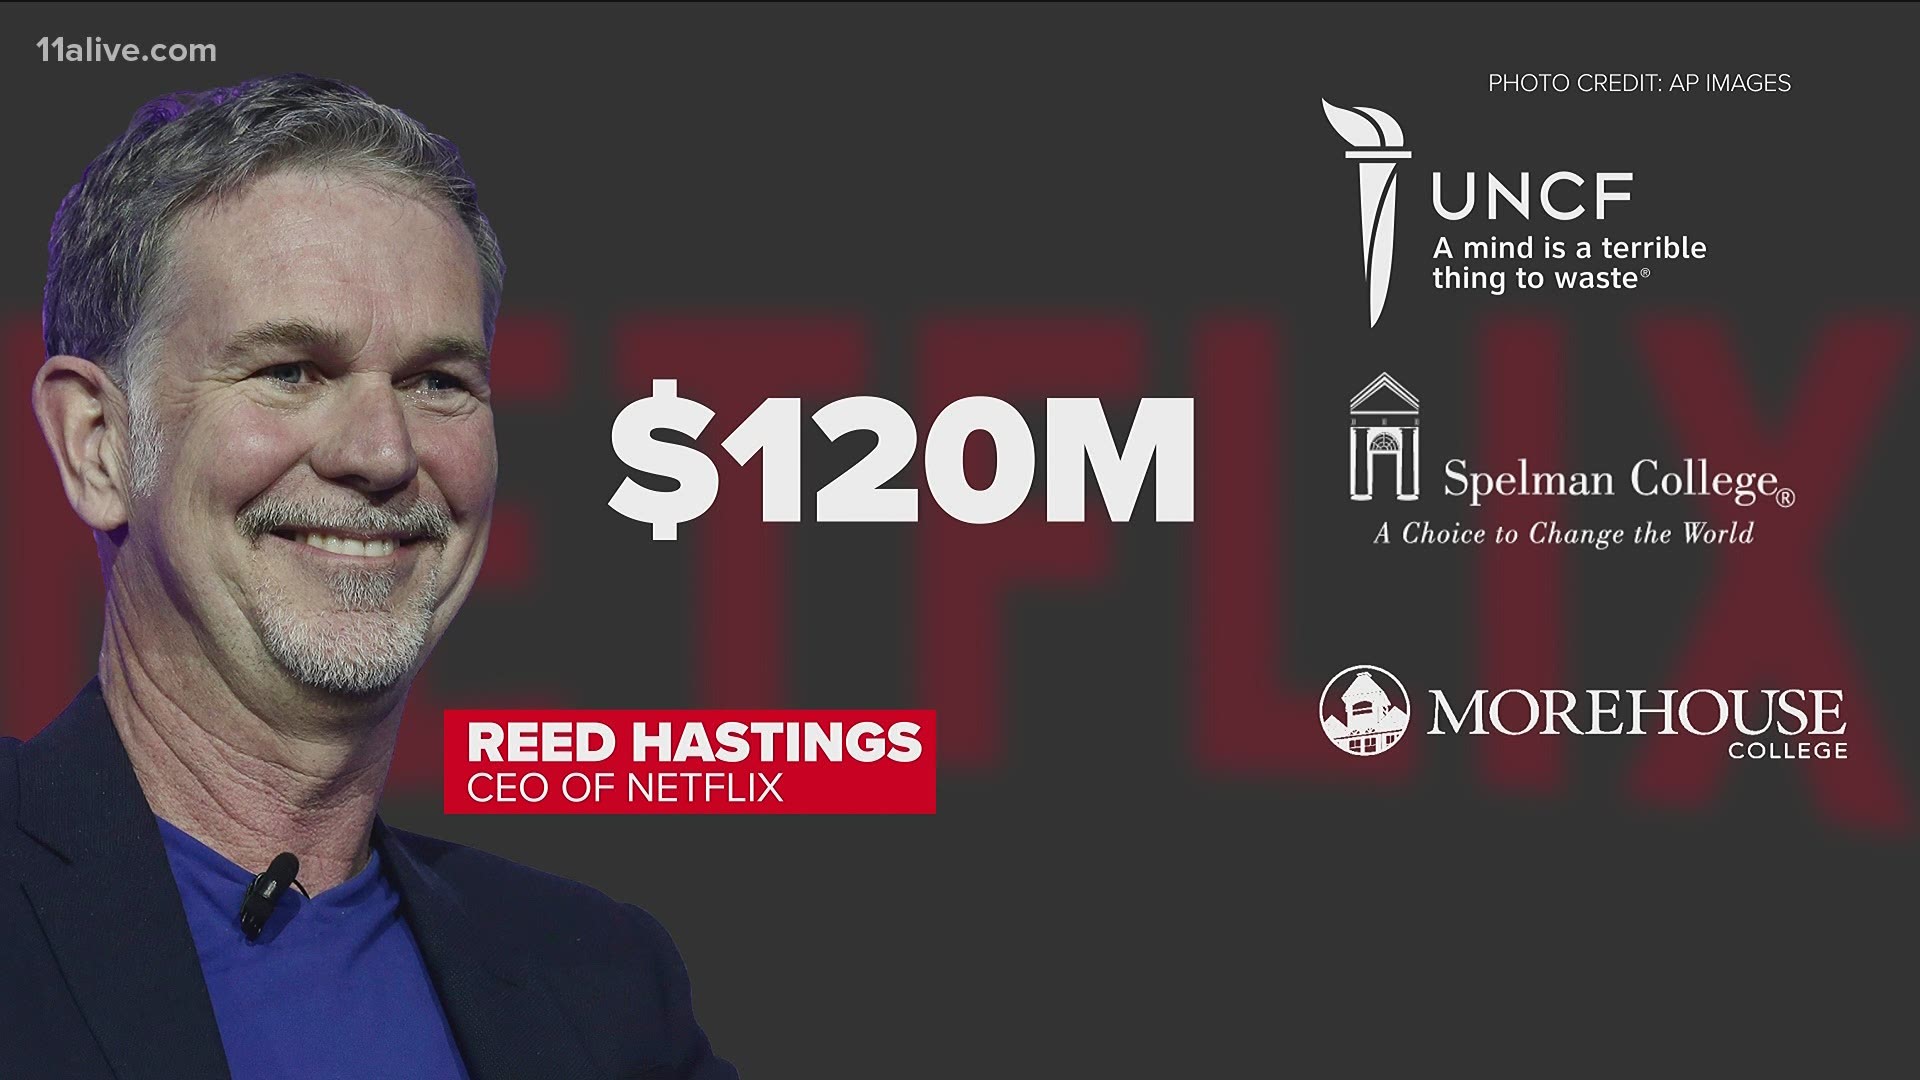 CEO Reed Hastings said now is the time when “everyone needs to figure out” how to contribute to solving racism.